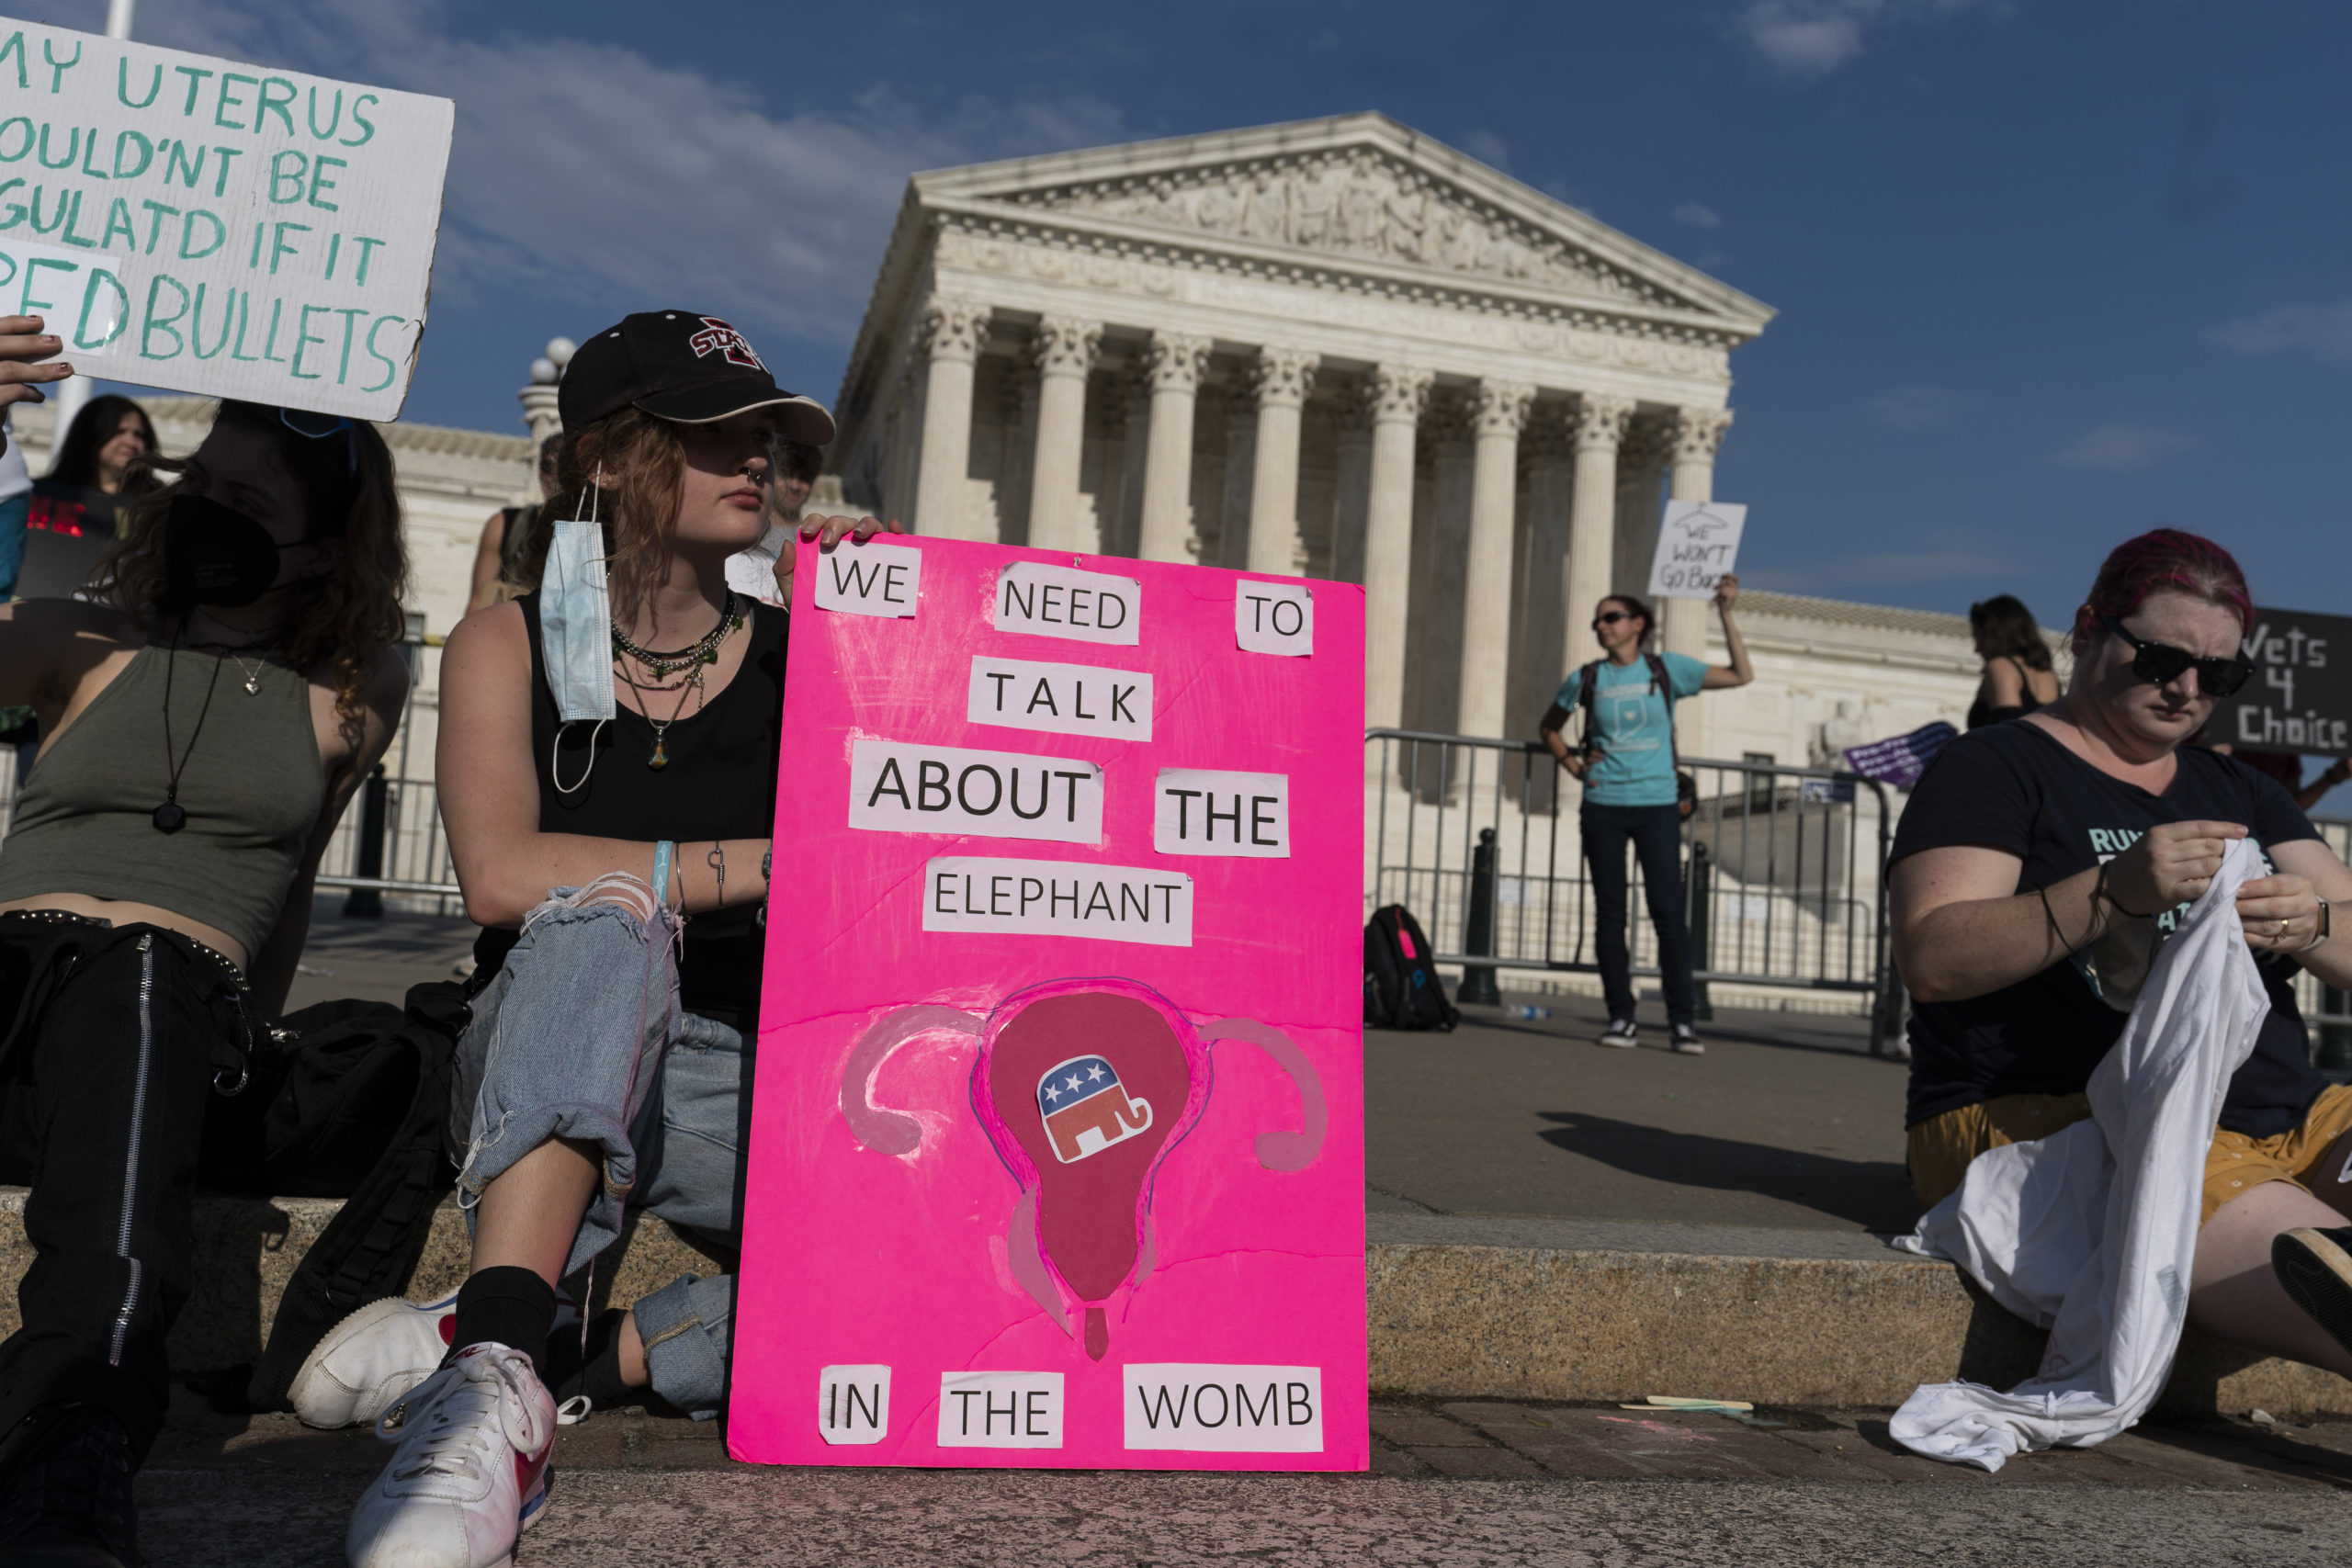 The Abortion History the Right Doesn’t Mention